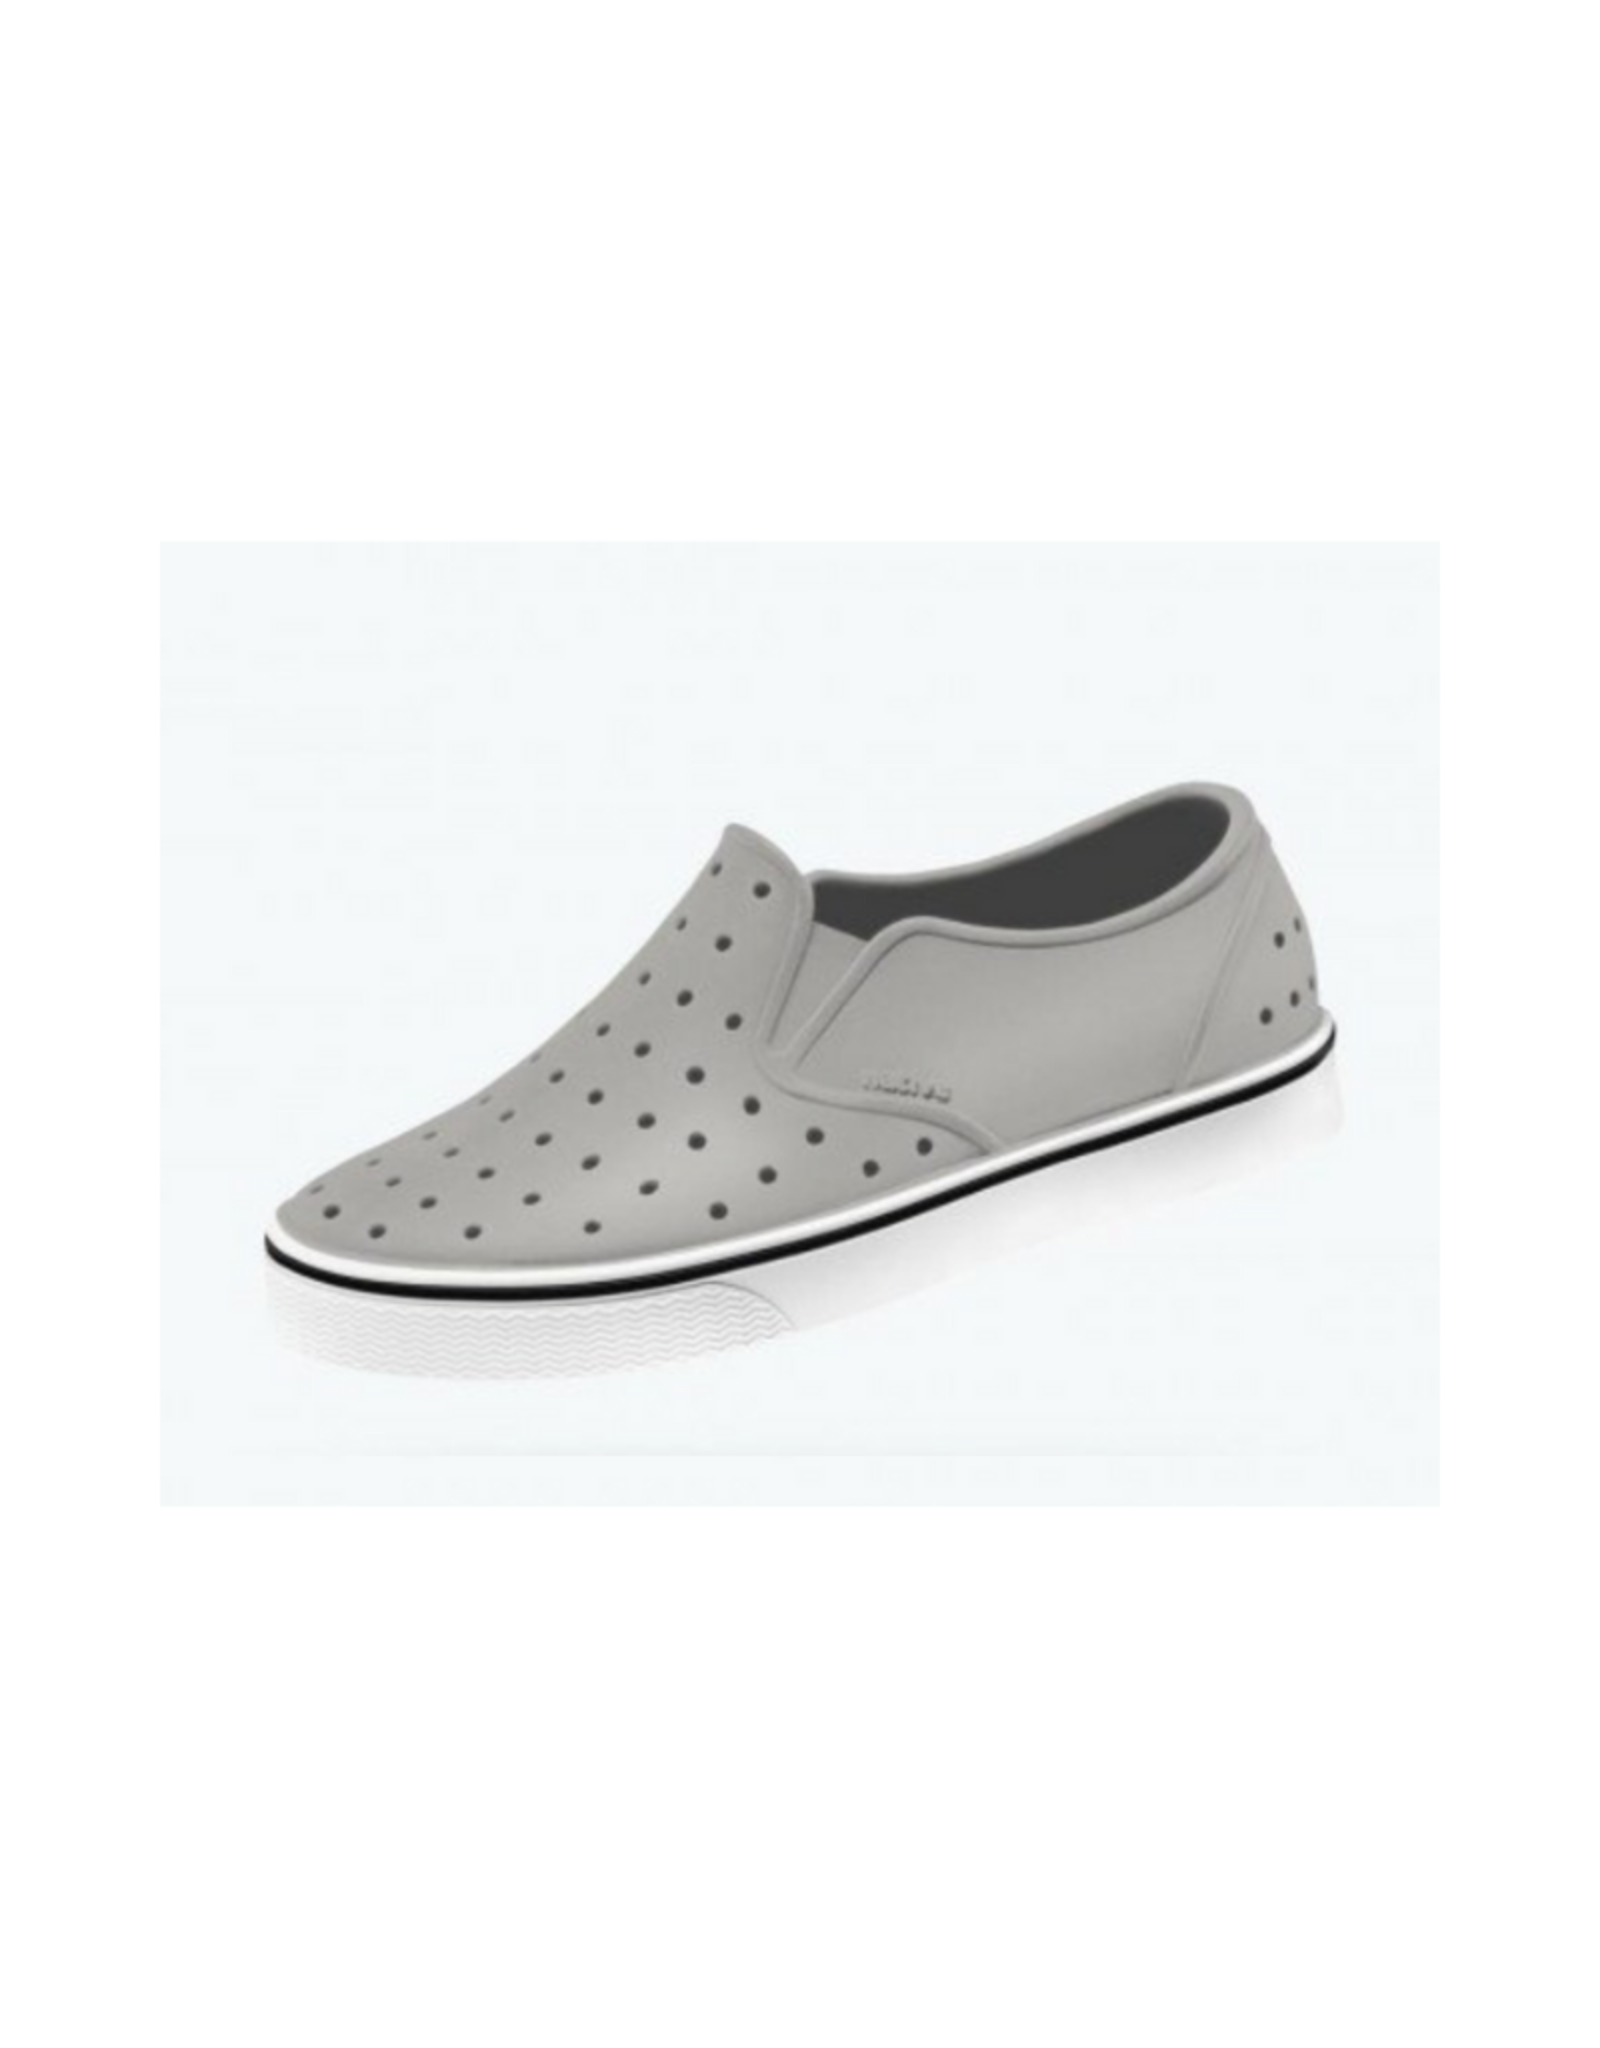 Miles Child Colorful Slip On Shoes